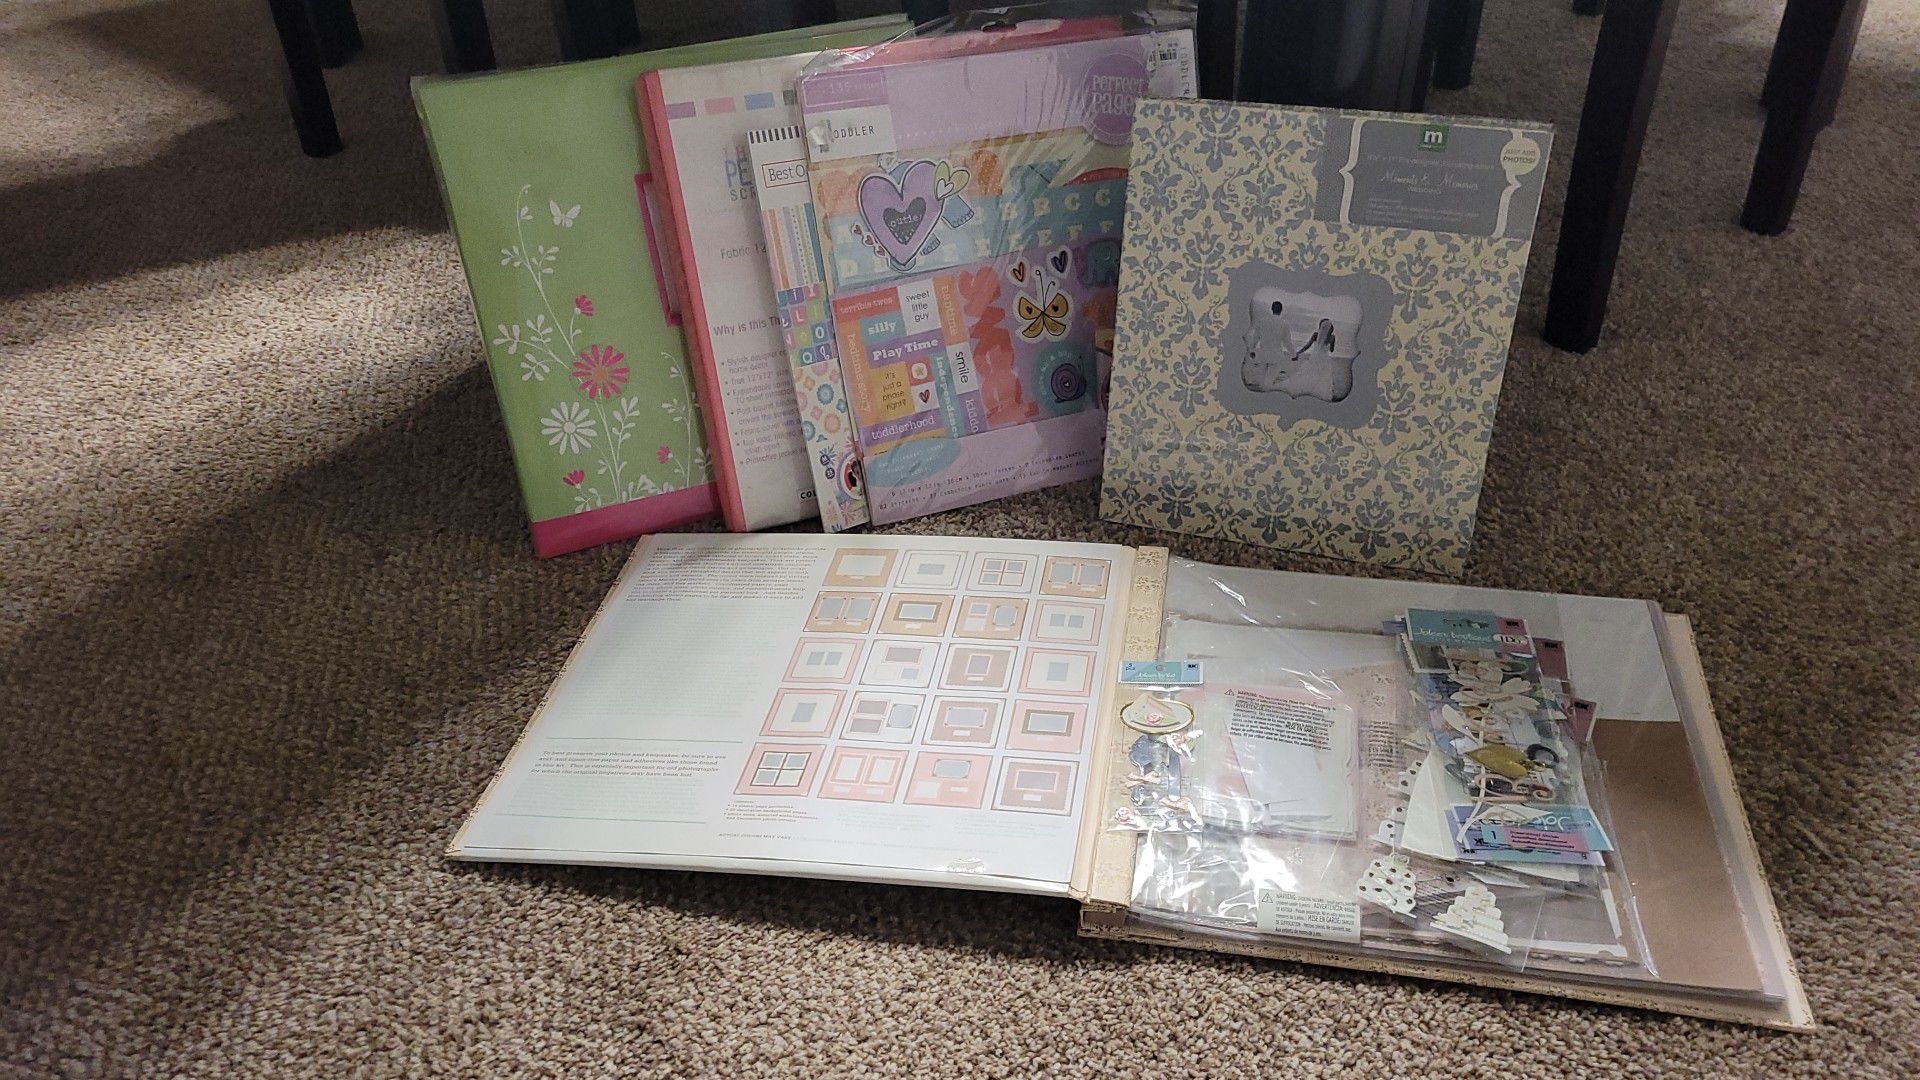 Scrapbooks, wedding and toddler. Wedding one includes alot of fancy additional stickers